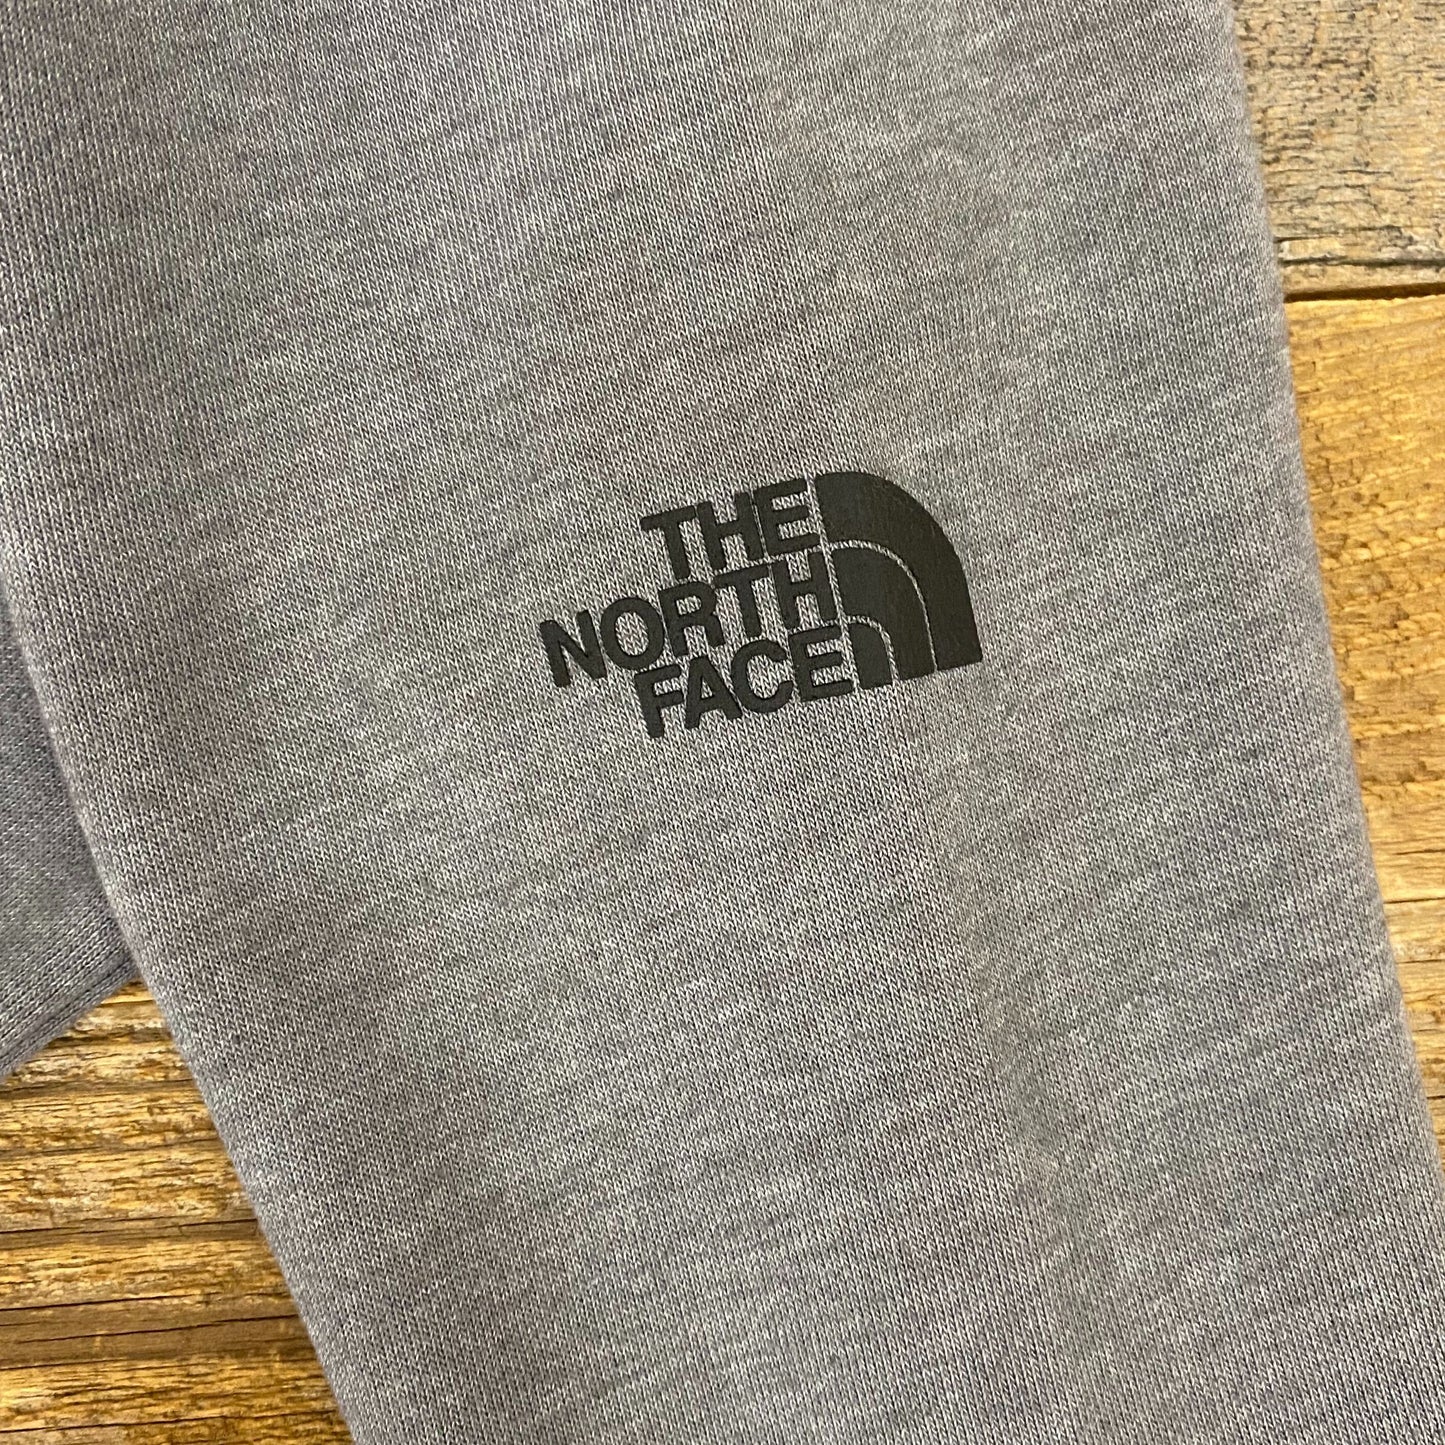 The North Face x Surf Wyoming® Winter Hood - Heather Grey